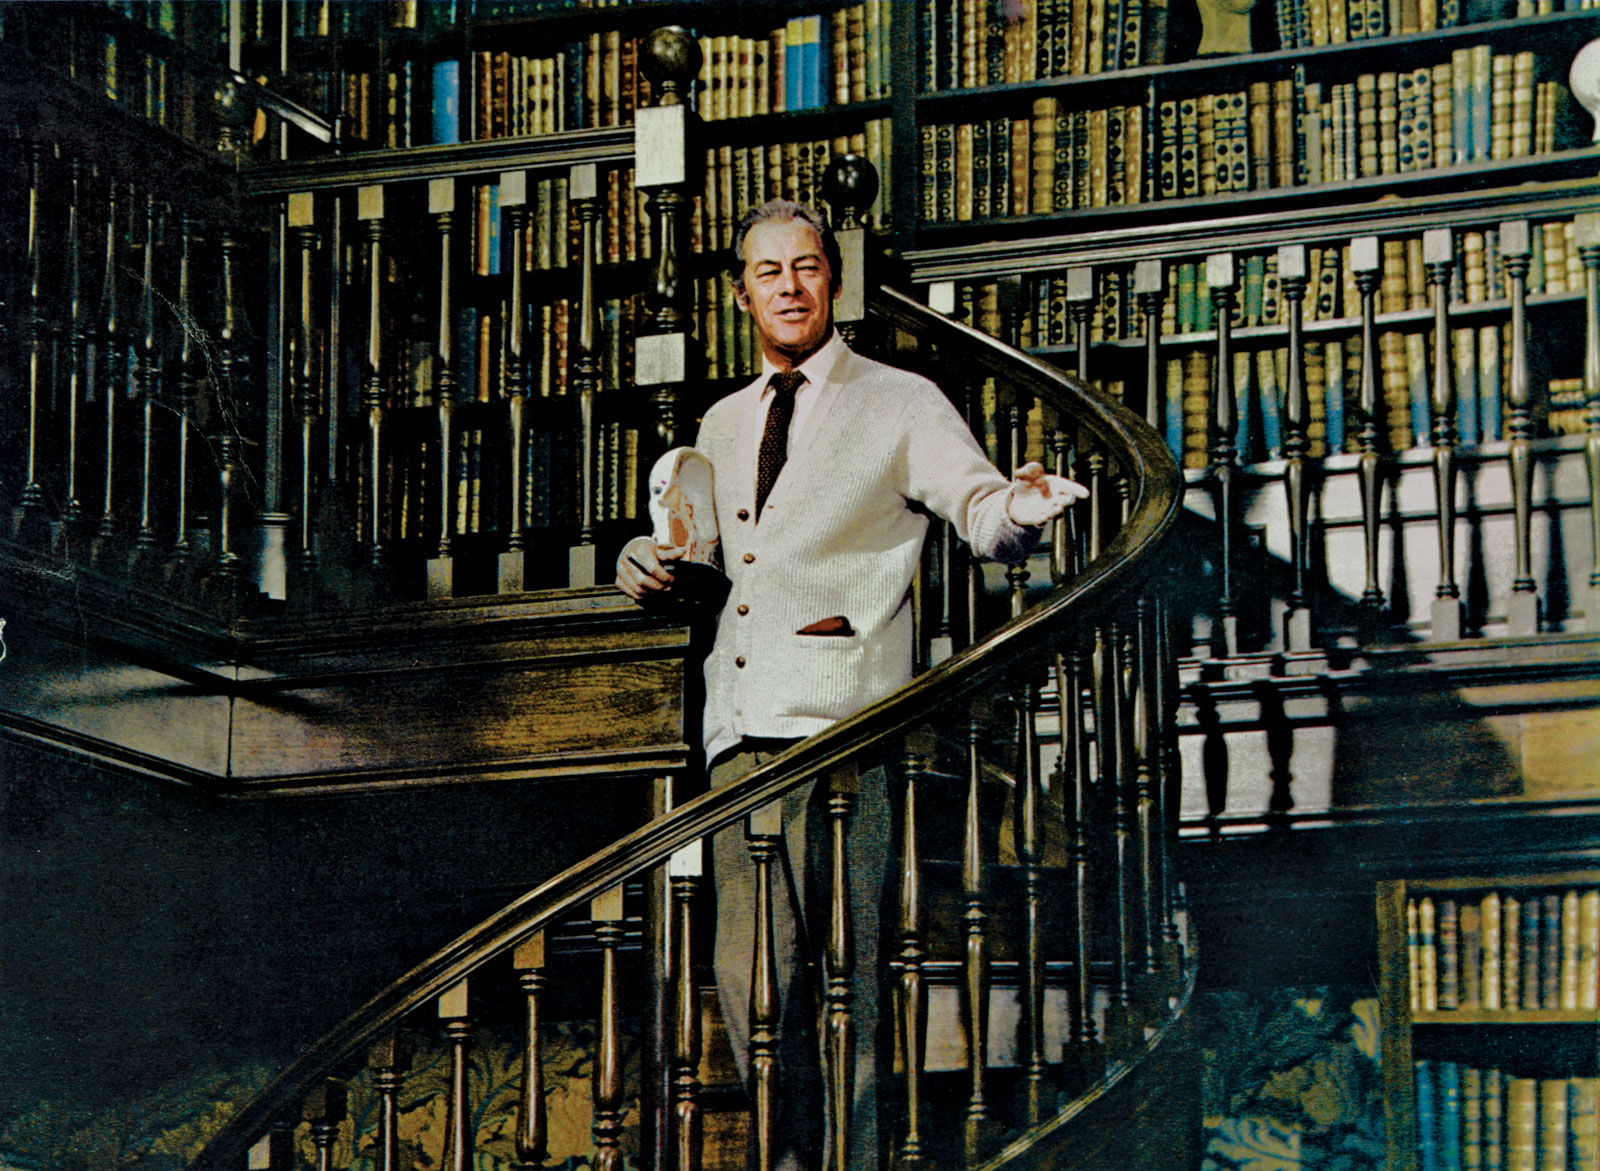 Rex Harrison playing the character of Henry Higgins from My Fair Lady